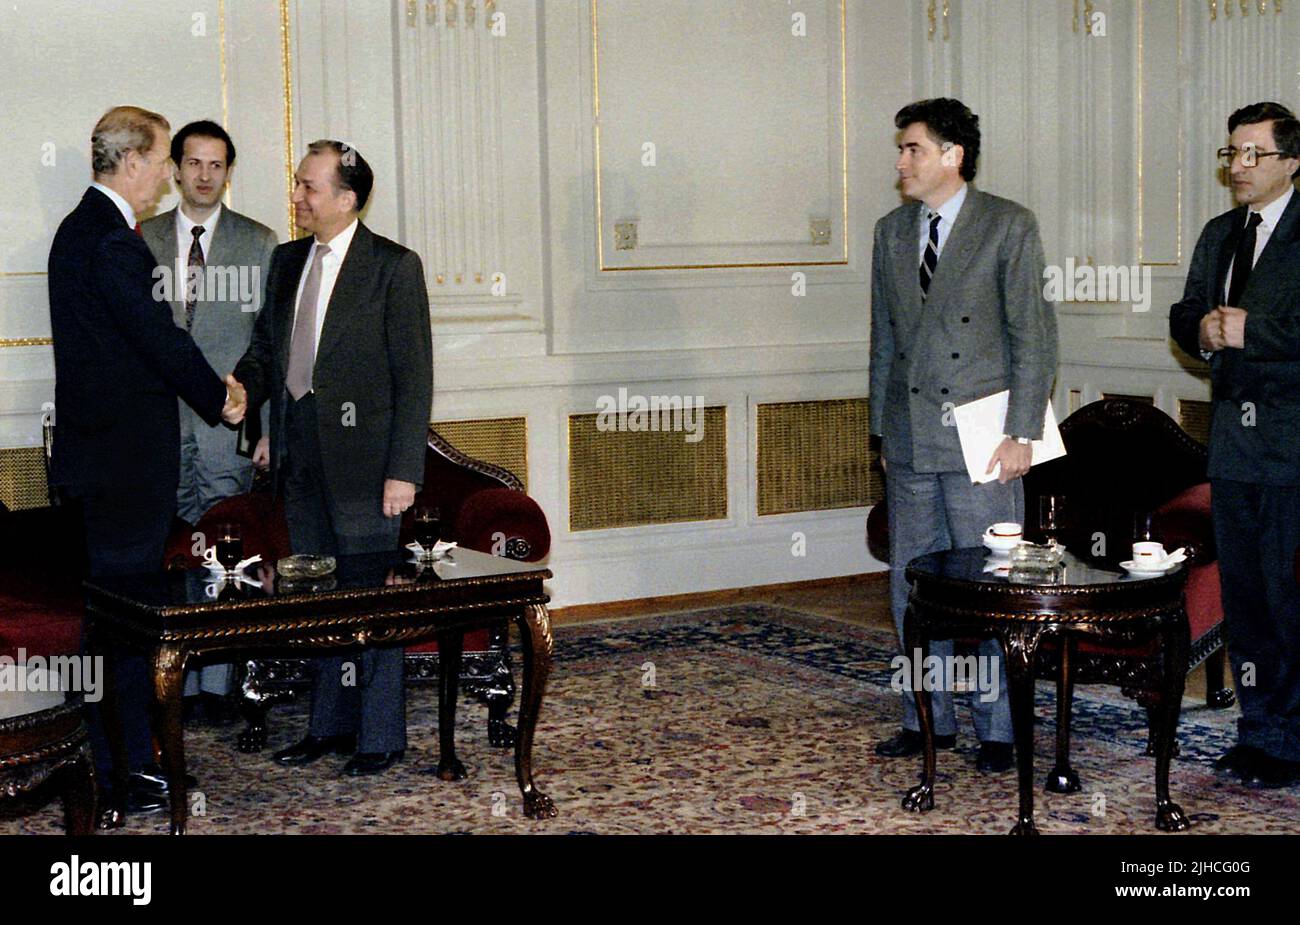 Bucharest, Romania, February 1990. U.S. Secretary of State under President George H. W. Bush, James Baker, visiting Romania, right after the Romanian Revolution of 1989. Meeting with the provisional FSN government, with Ion Iliescu (3rd from left) as president and Petre Roman (second from right) as Prime Minister. Stock Photo